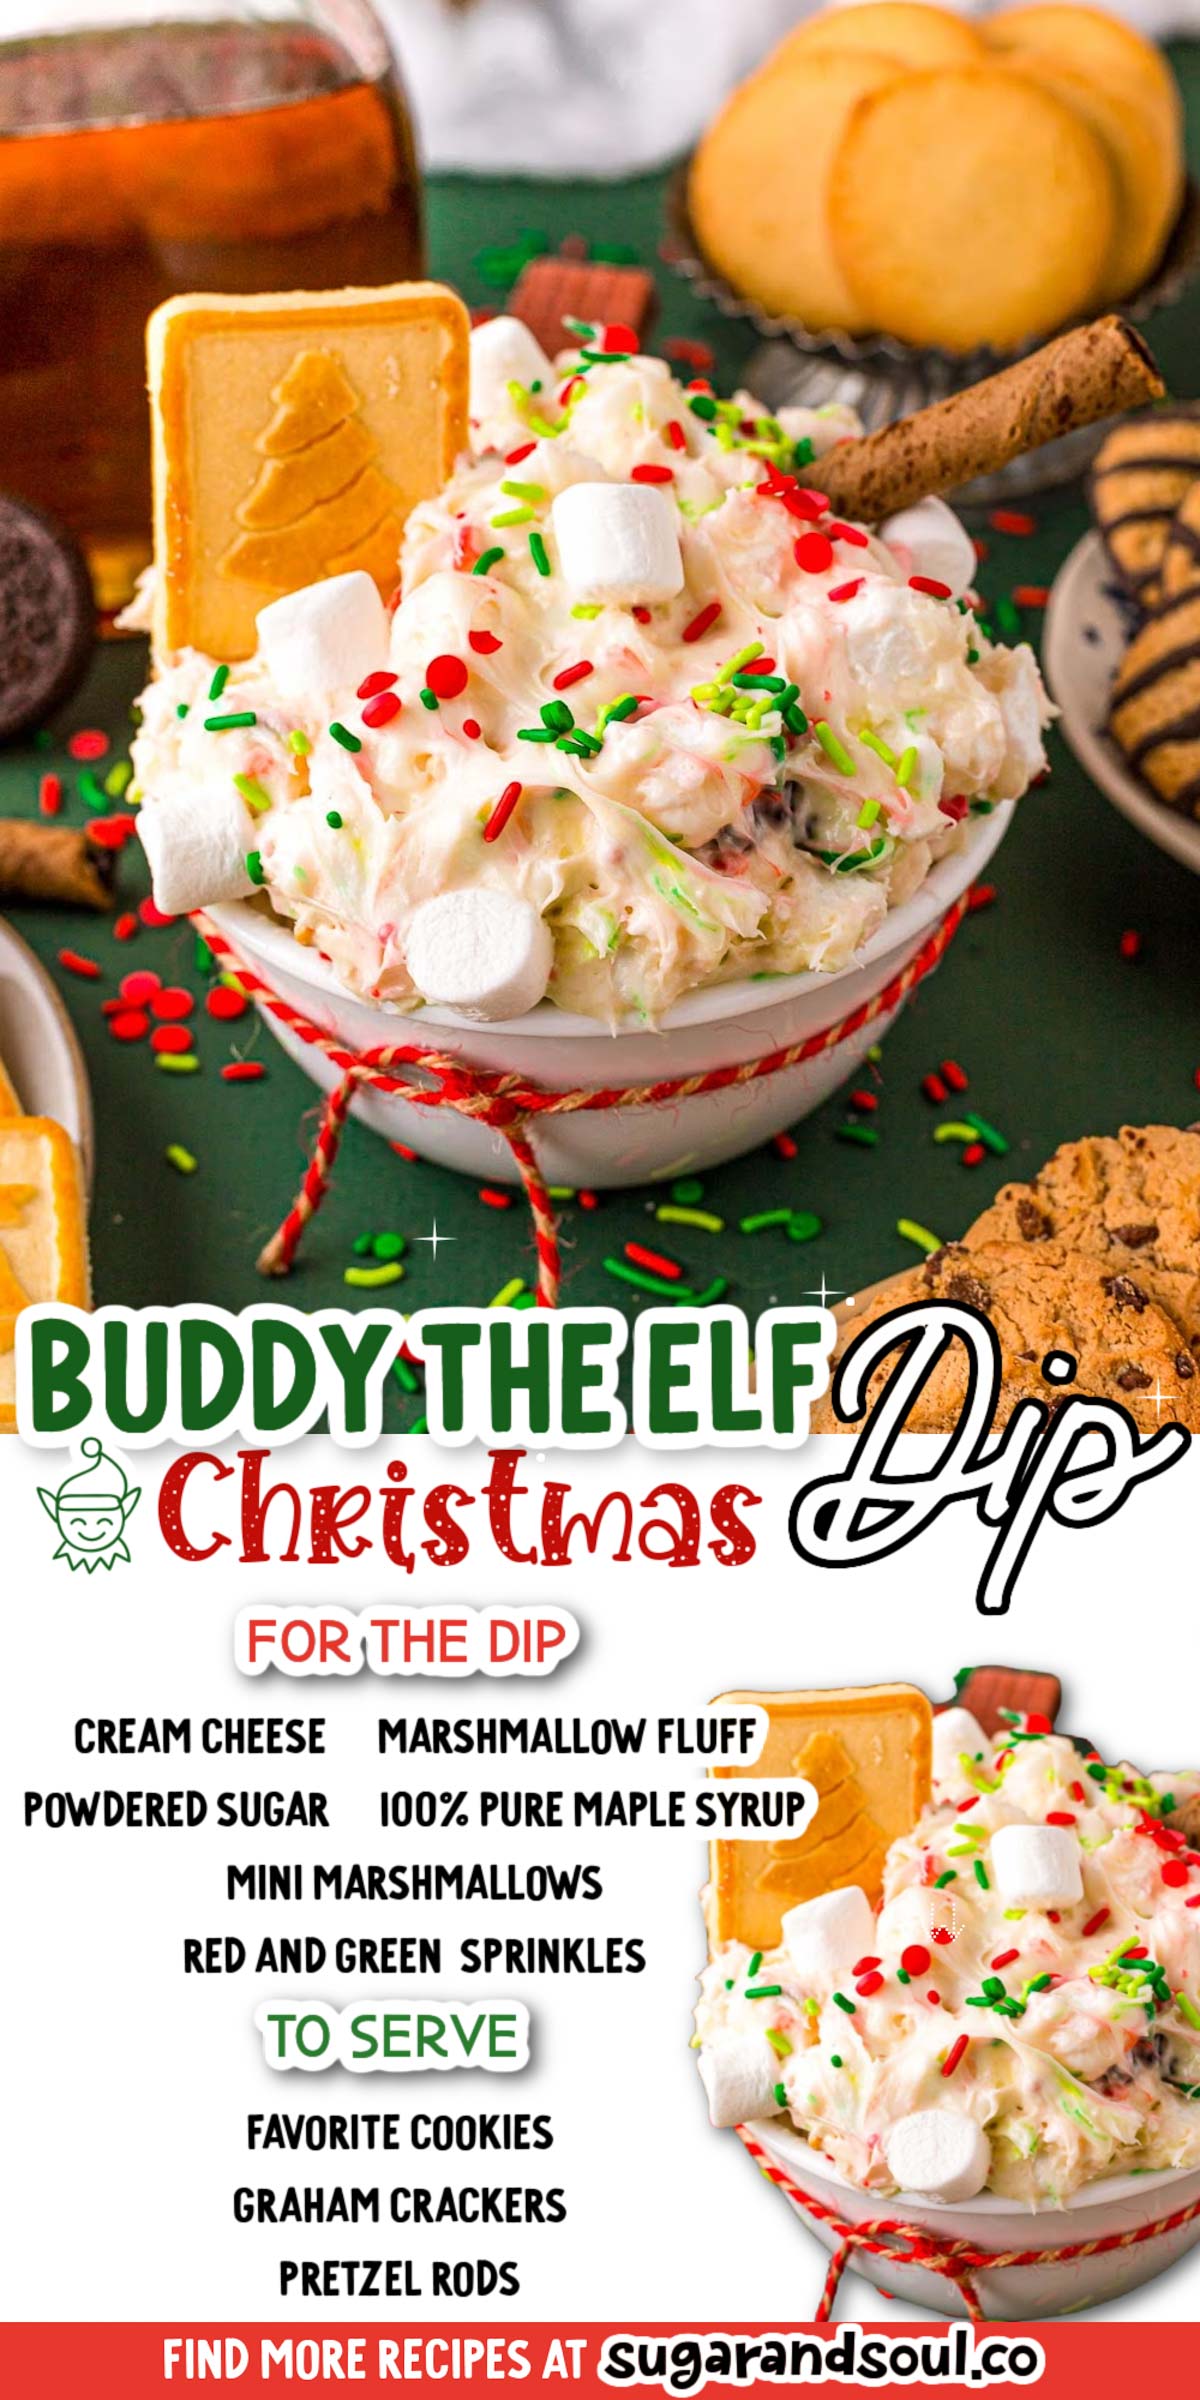 This Buddy The Elf Christmas Dip is an easy 5 ingredient dessert dip that's made with cream cheese, fluff, powdered sugar, maple syrup, mini marshmallows, and holiday sprinkles! In only 20 minutes you'll be eating just like everyone's favorite elf!  via @sugarandsoulco